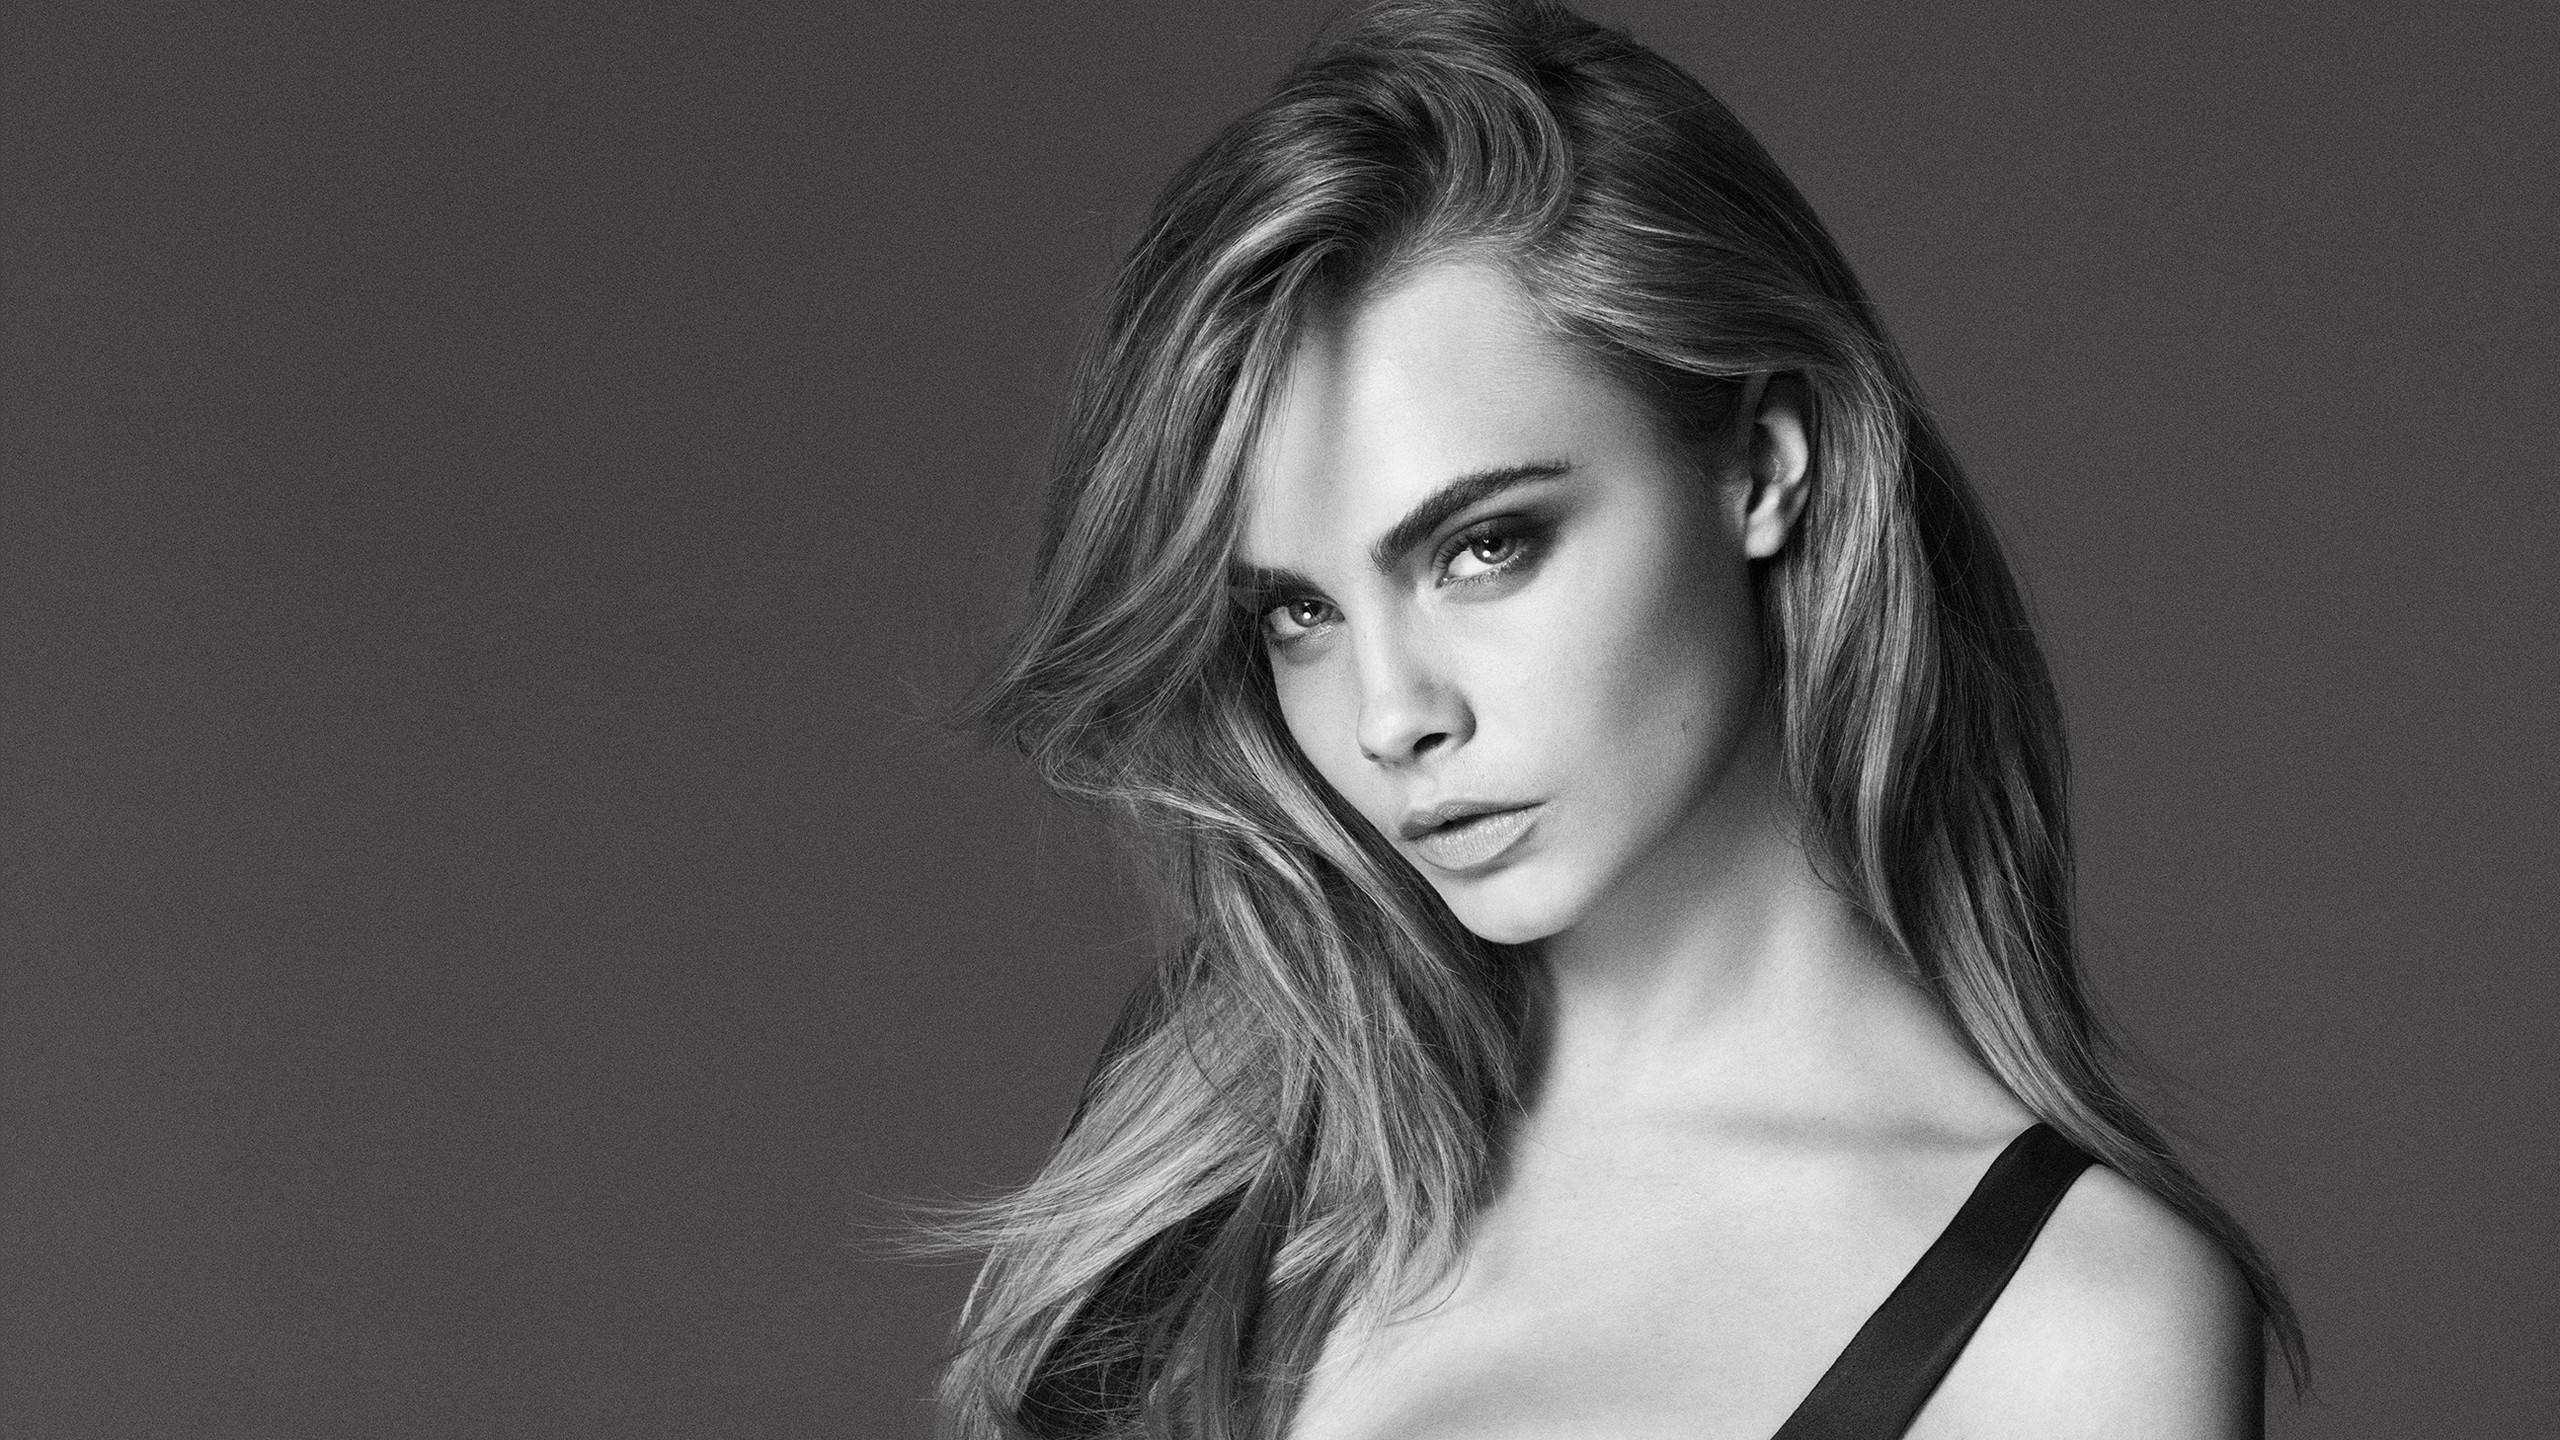 New Cara Delevingne Wallpaper. Download High Quality HD Image